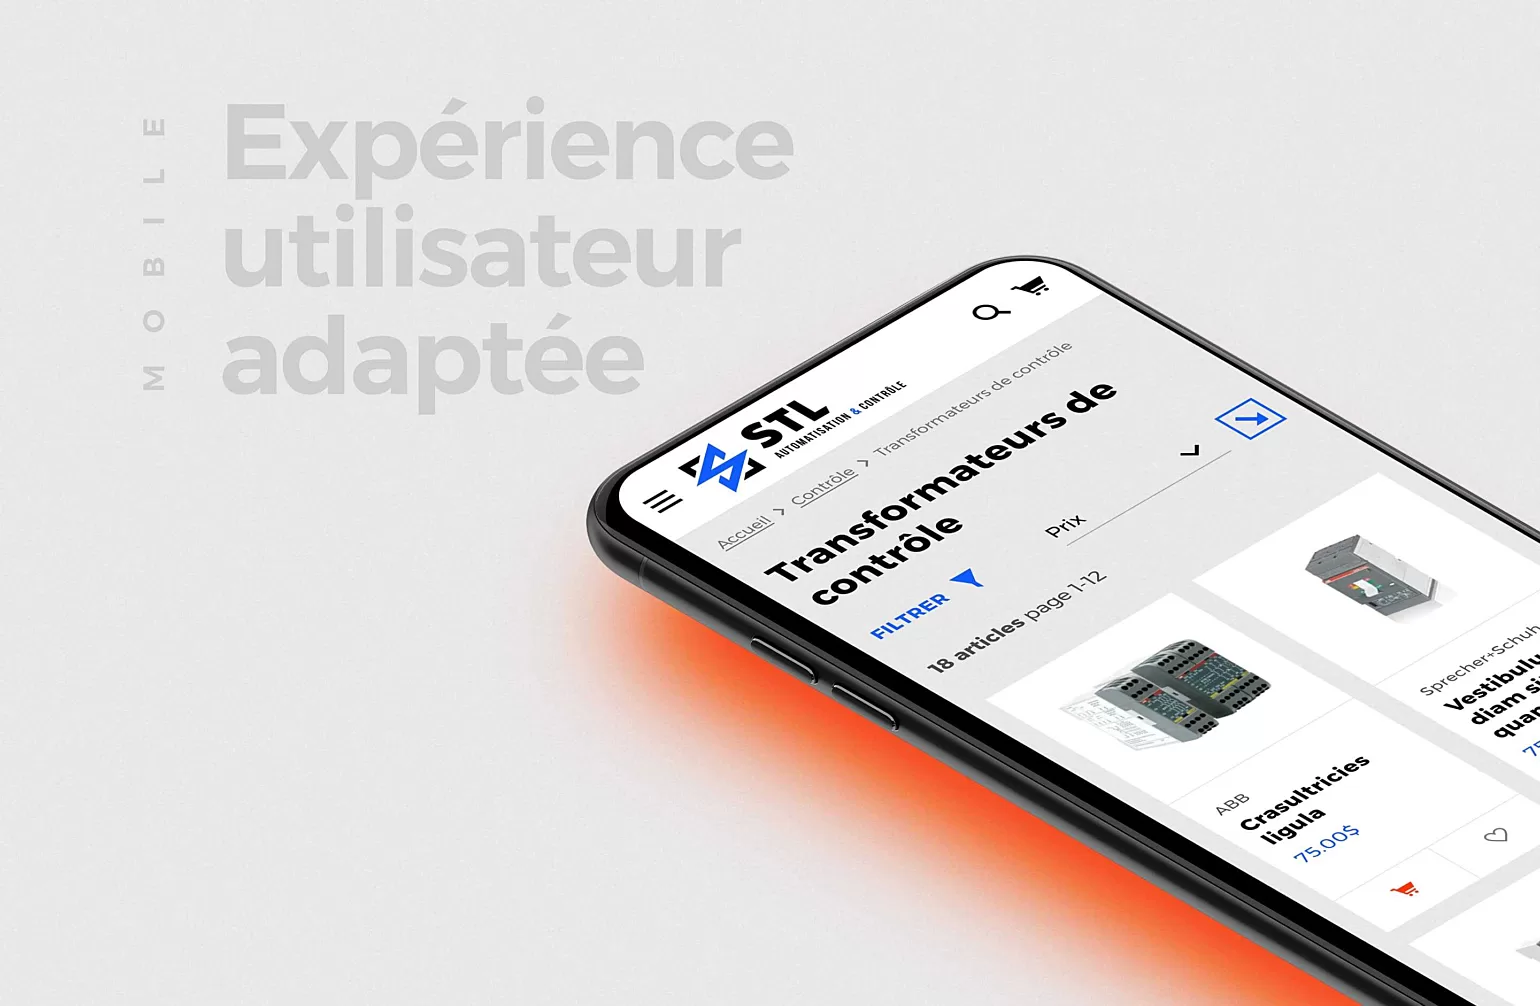 Stl ux interface mobile adaptee 2x